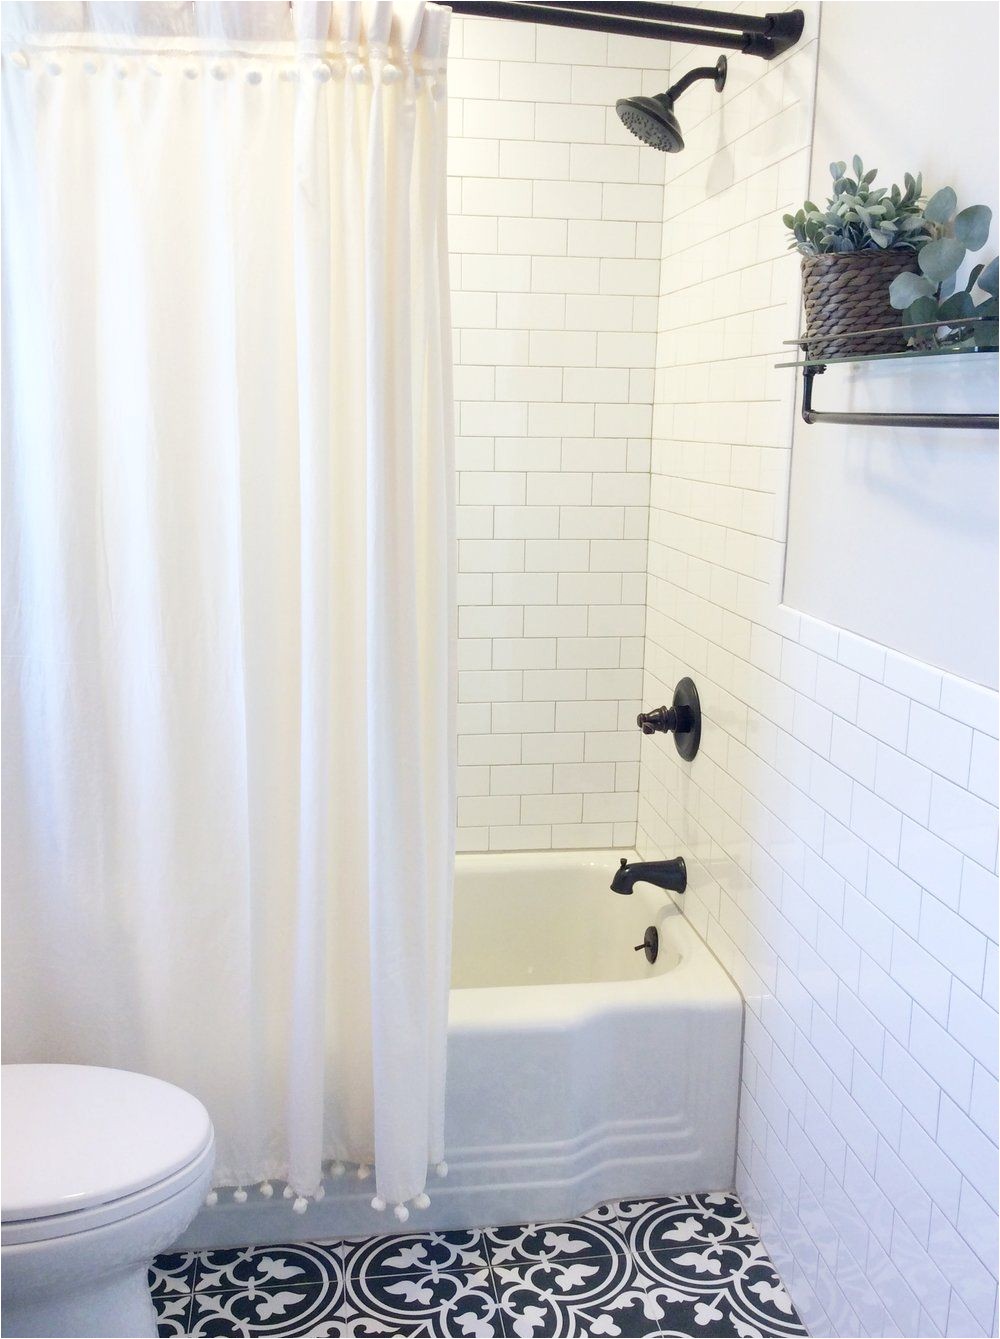 shower curtain urban outfitters kohler oil rubbed bronze fixtures toto toilet somertile floor oyster gray grout originial design by beam bloom